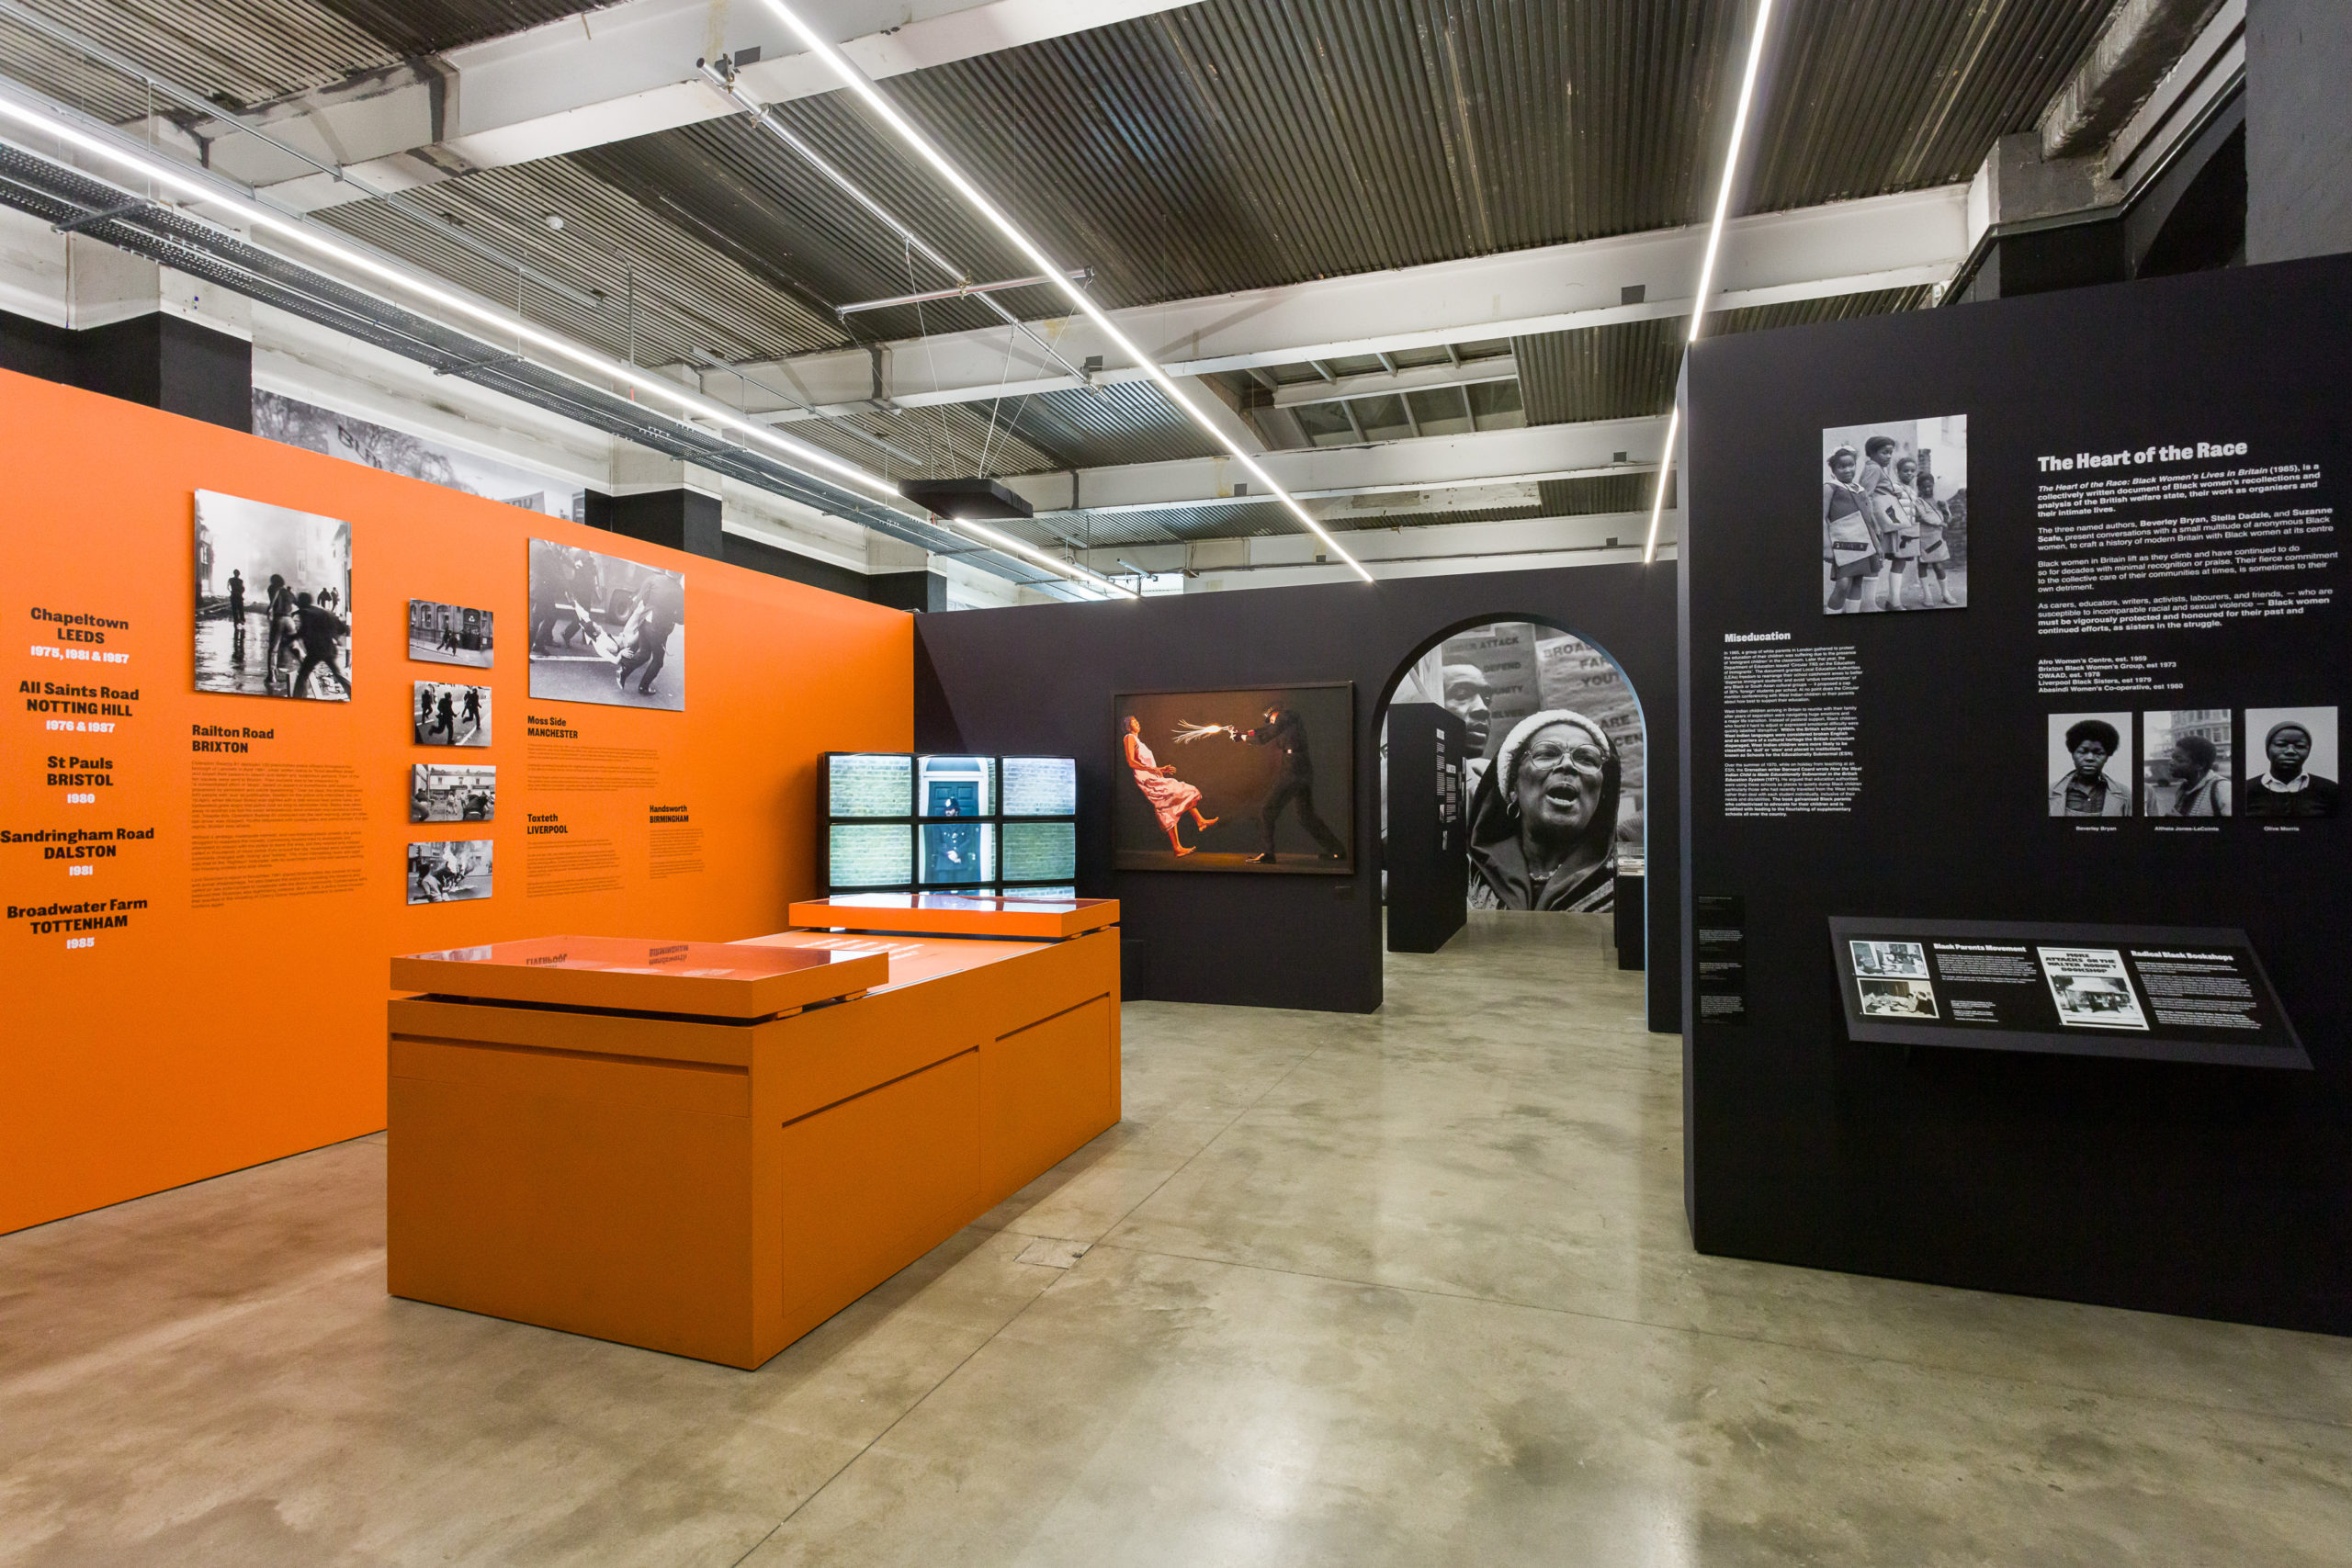 A view of the exhibition featuring an orange wall and table with text and photos on the left and a set of black walls with photos and text on the right. An archway leads through one of the black walls in the center into another part of the exhibition.